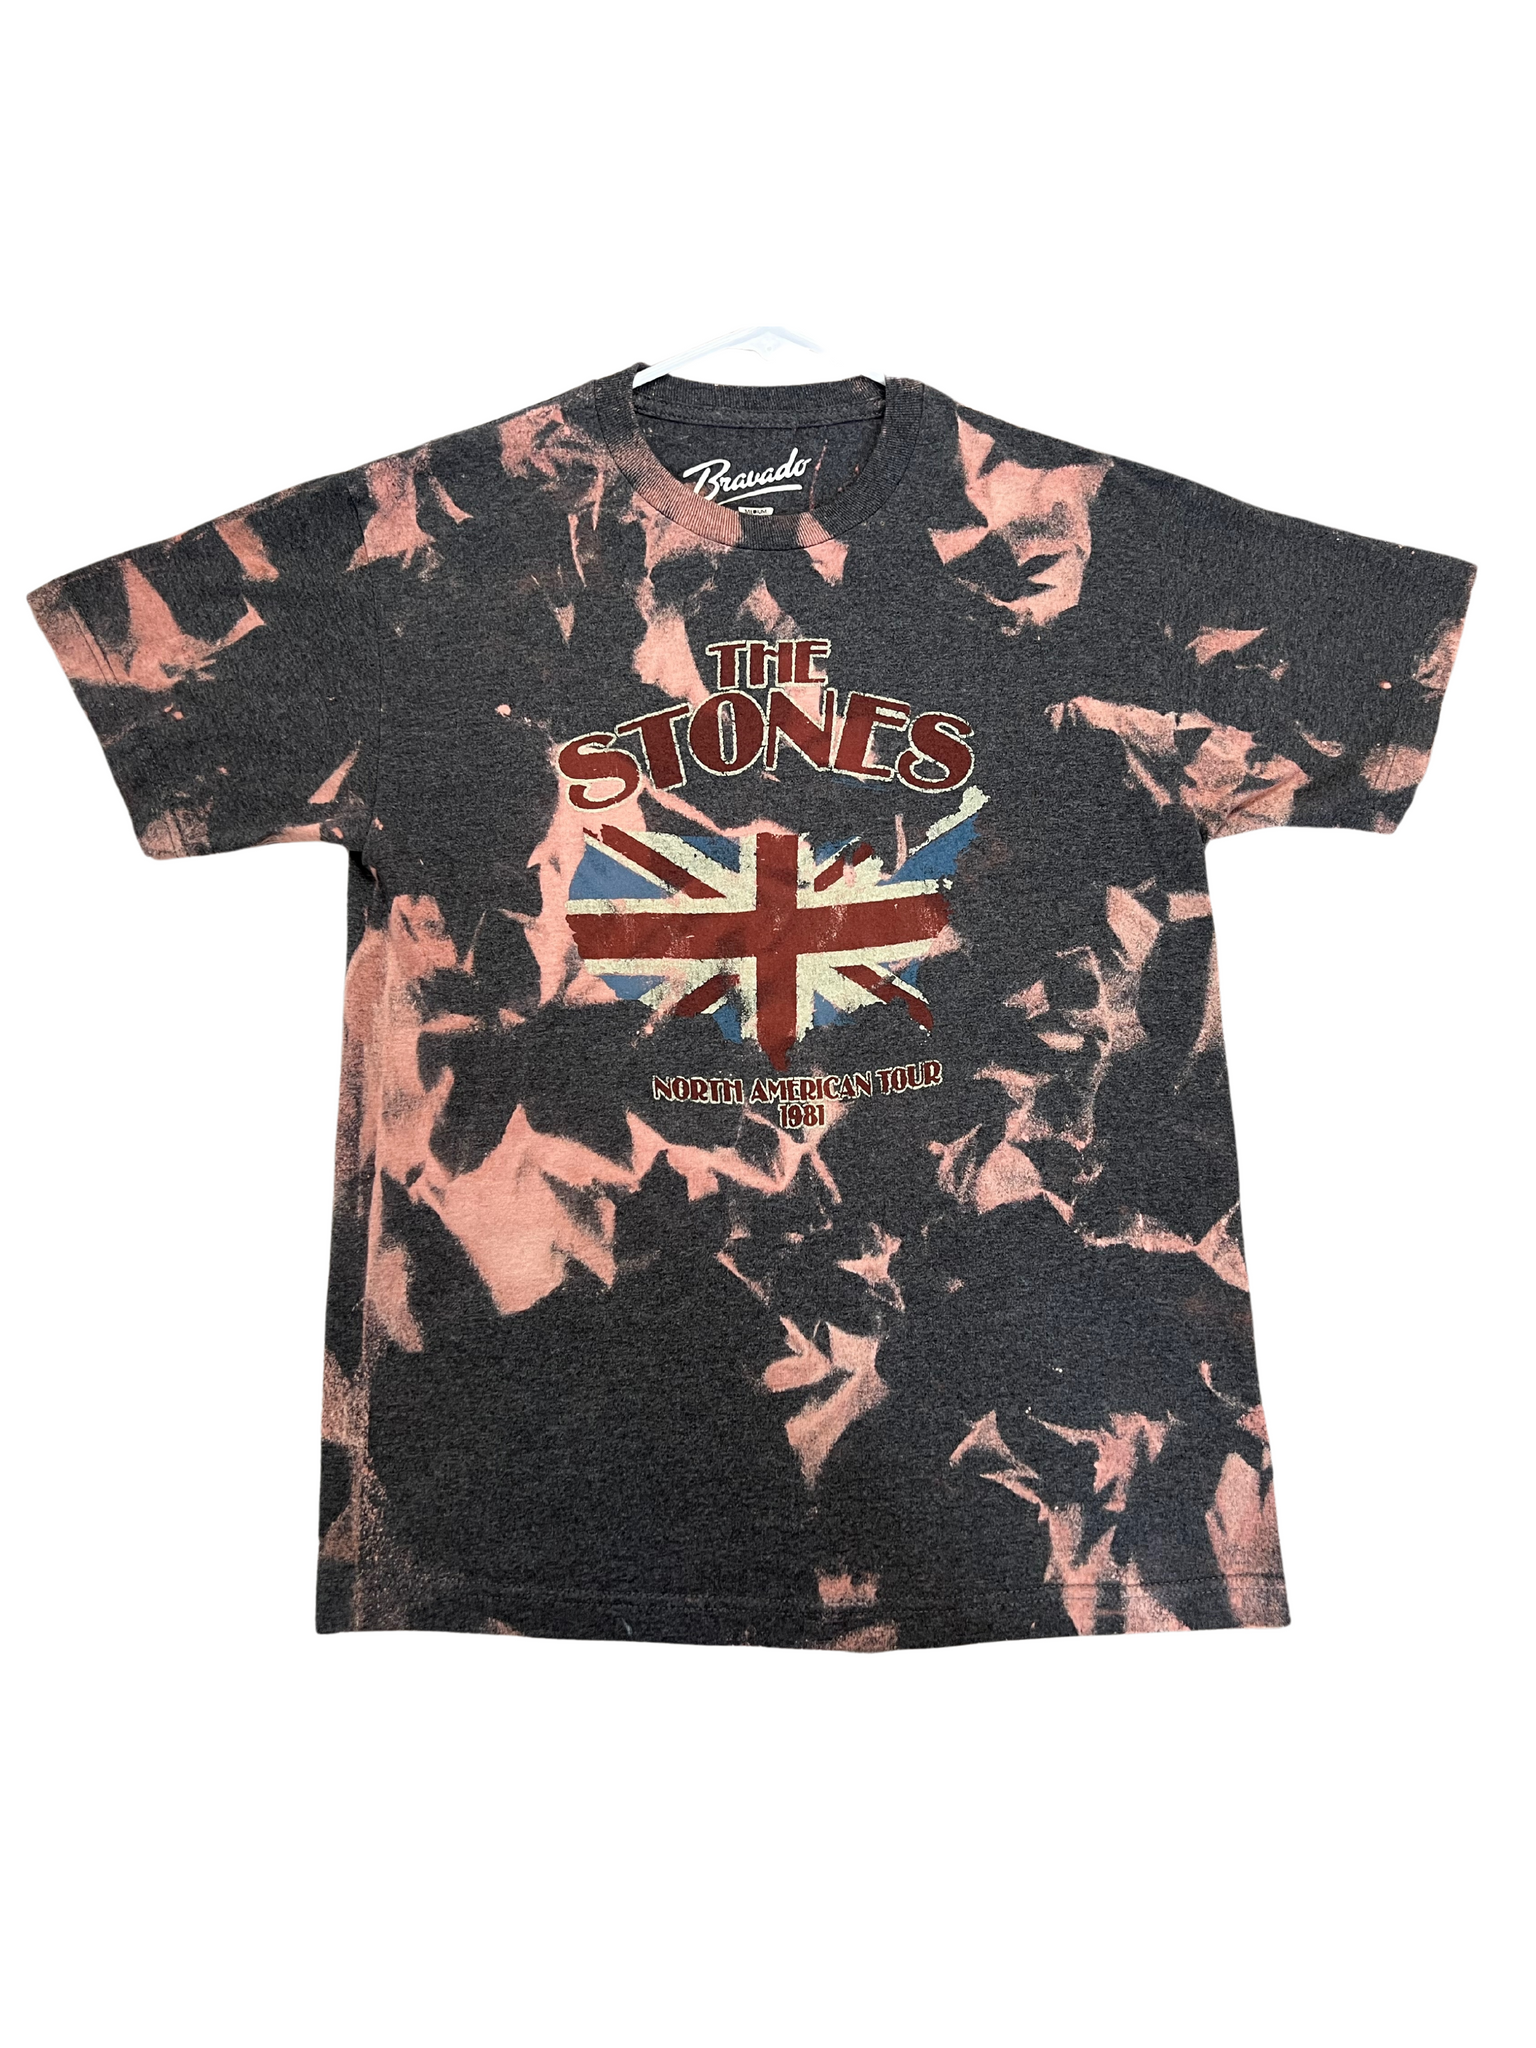 Rolling Stones Bleached Shirt